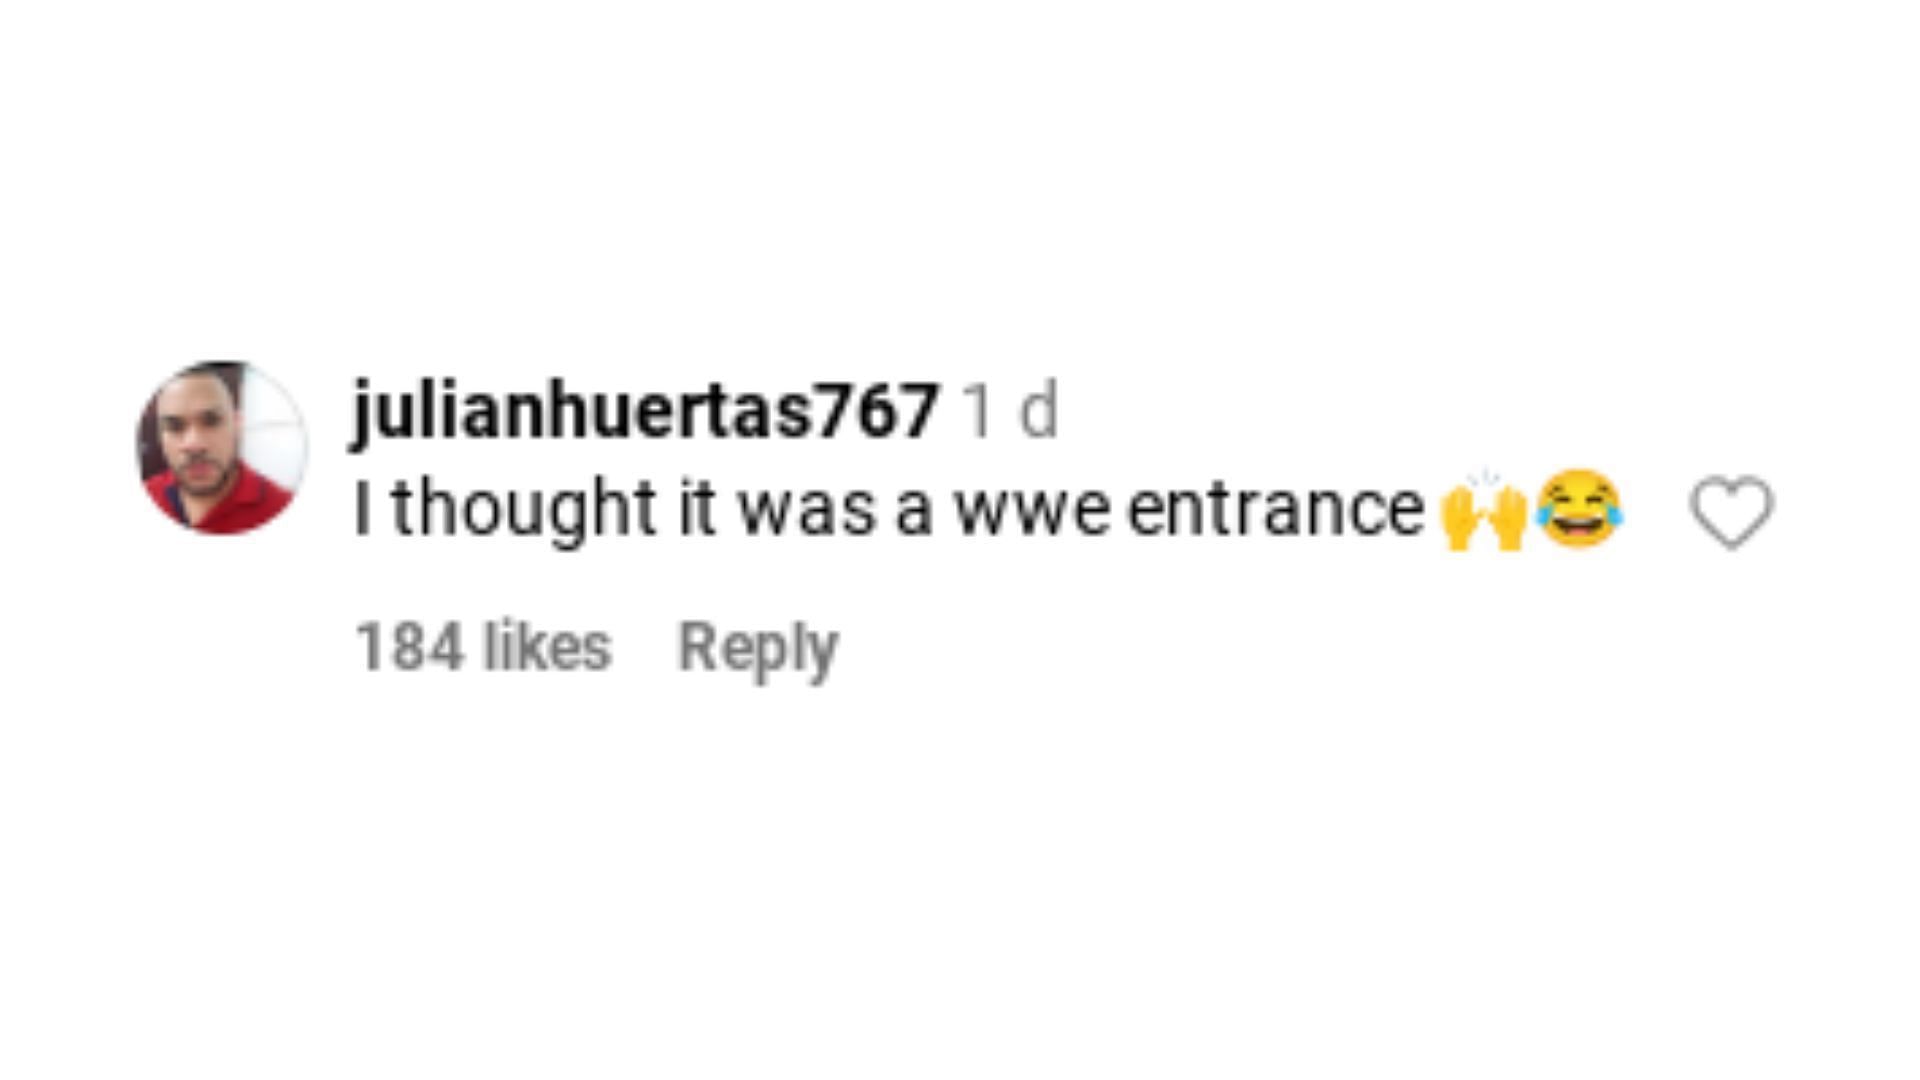 Another fan&#039;s comment